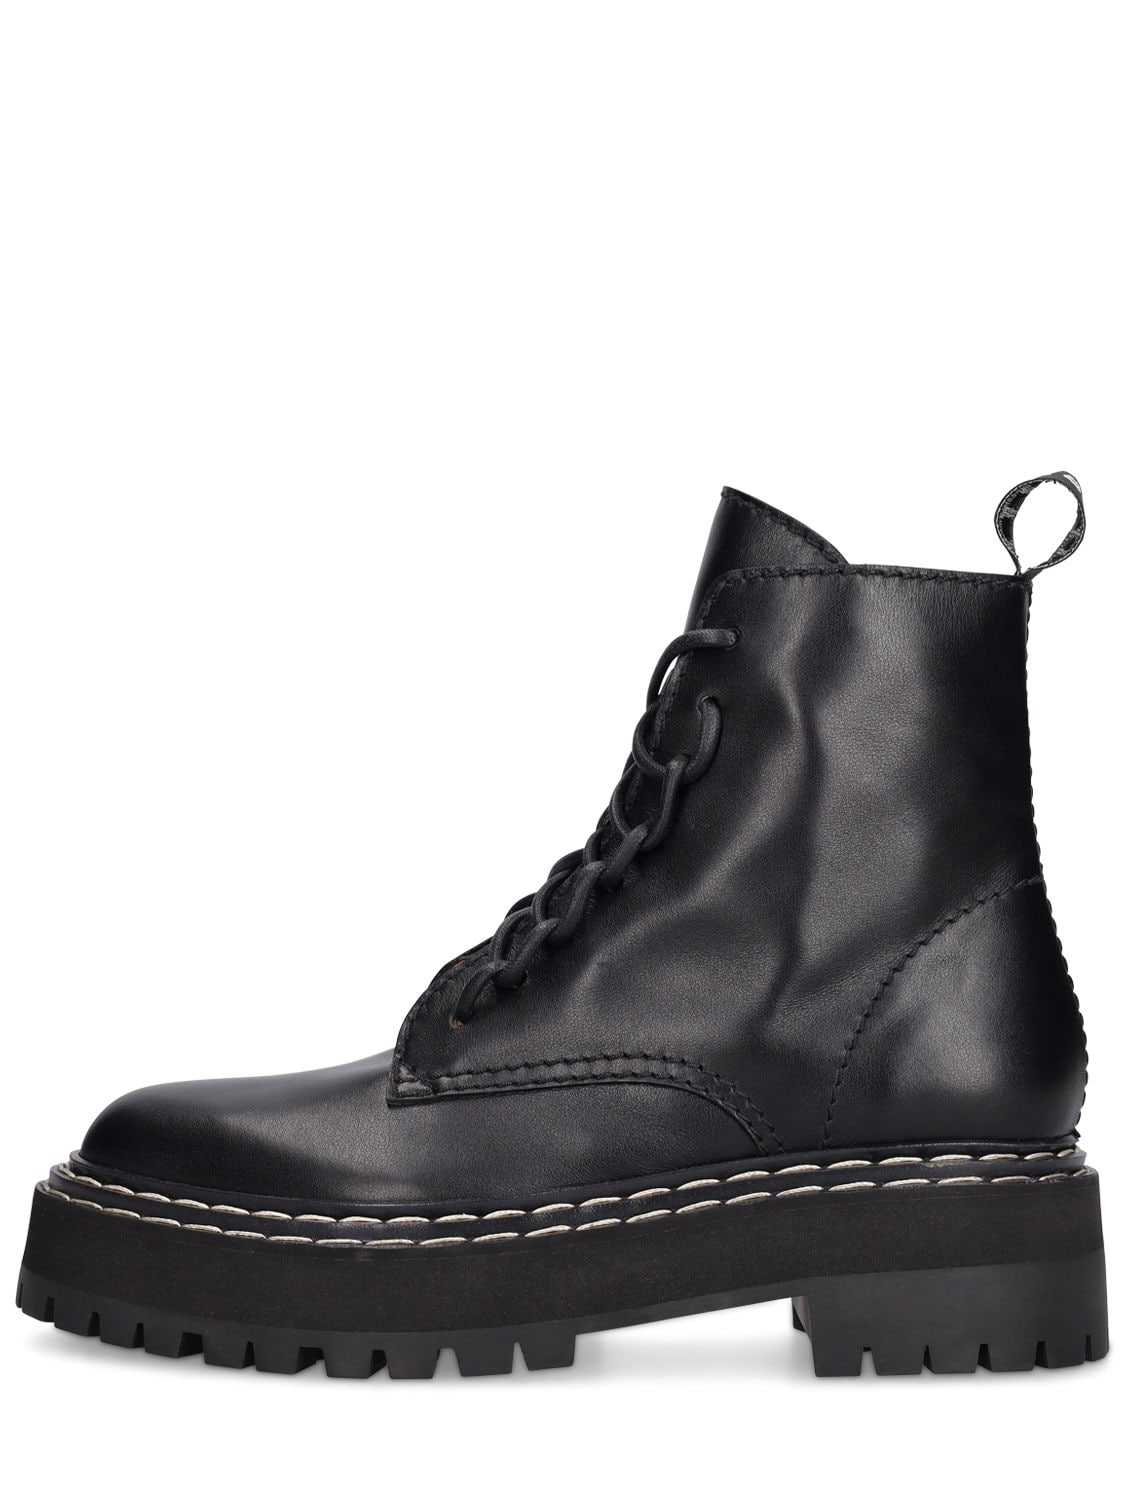 Proenza Schouler 30mm Lug Sole Leather Combat Boots In Black